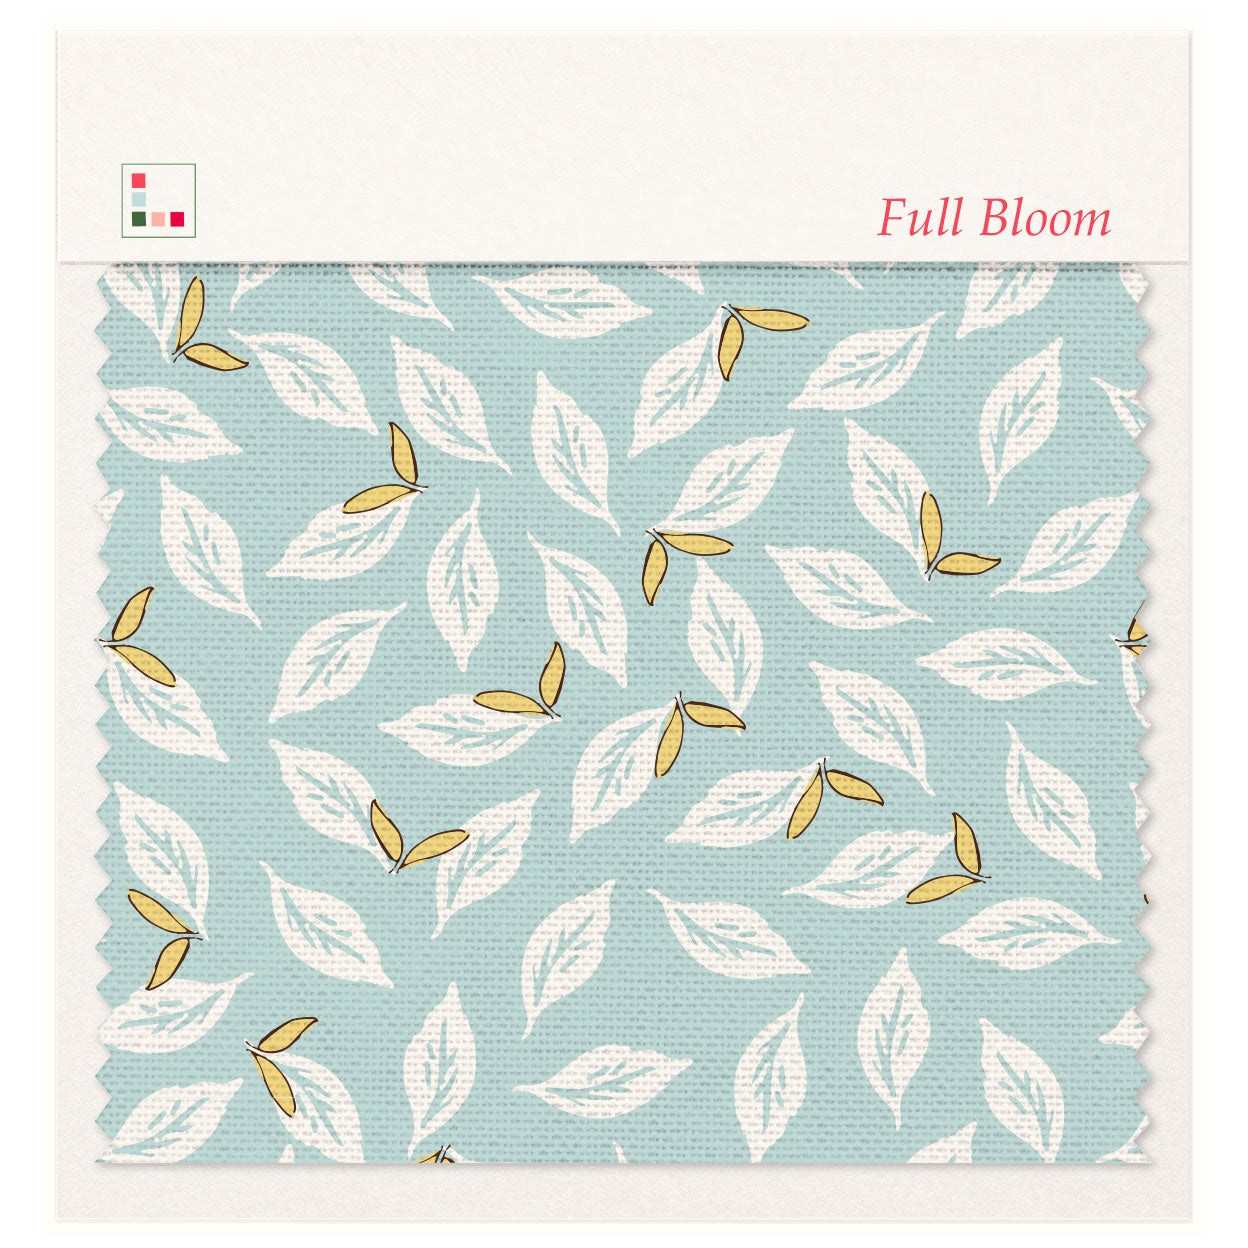 Five Patch Design Full Bloom fabric swatch